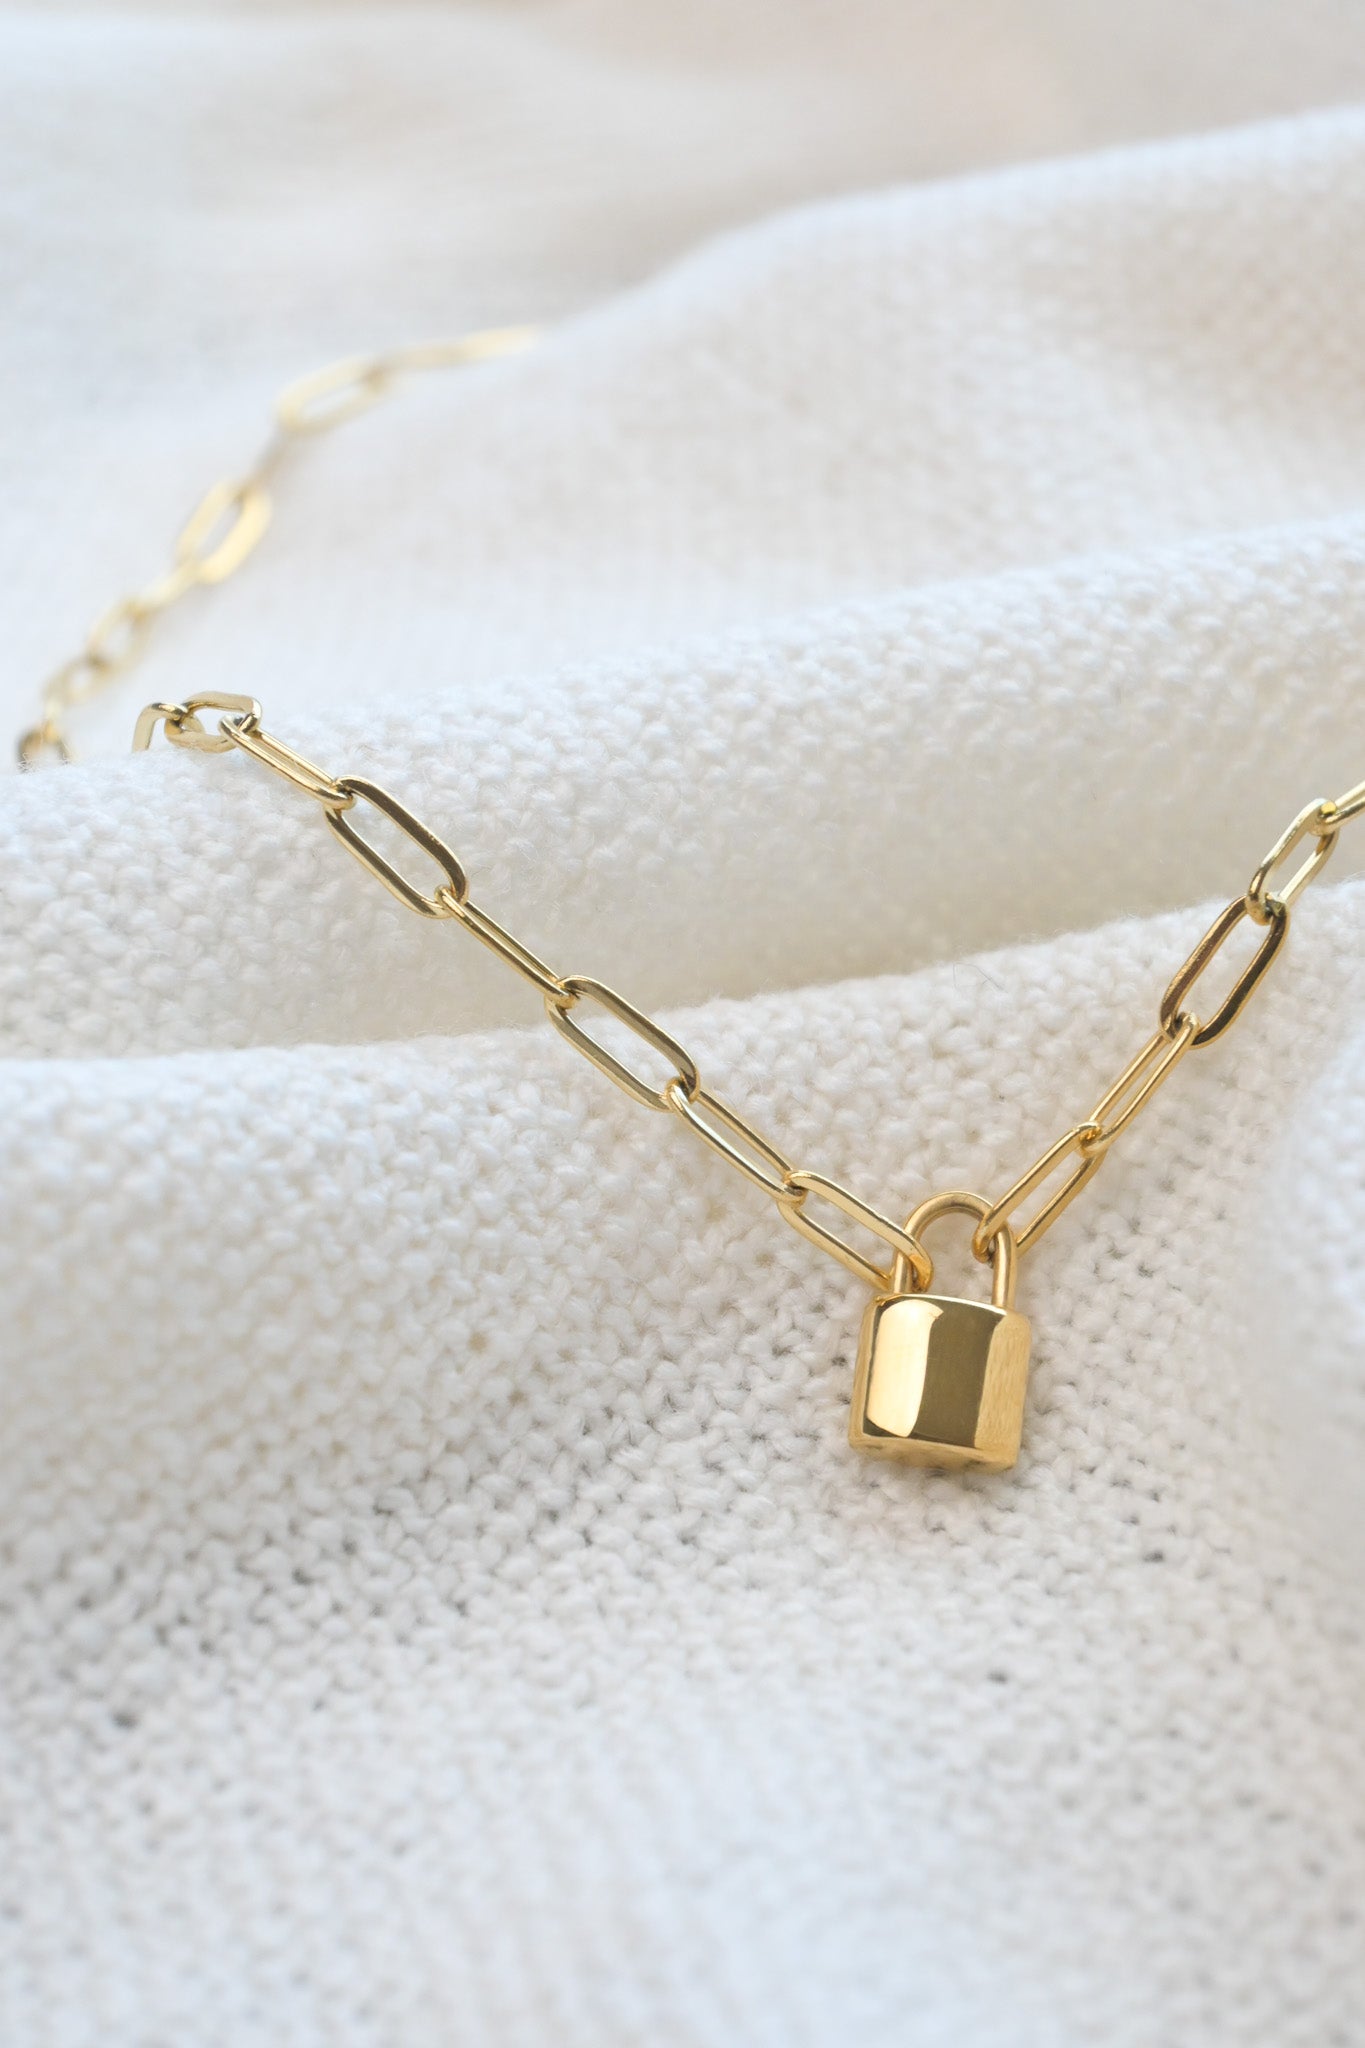 Locl necklace gold plated hypoallergenic 